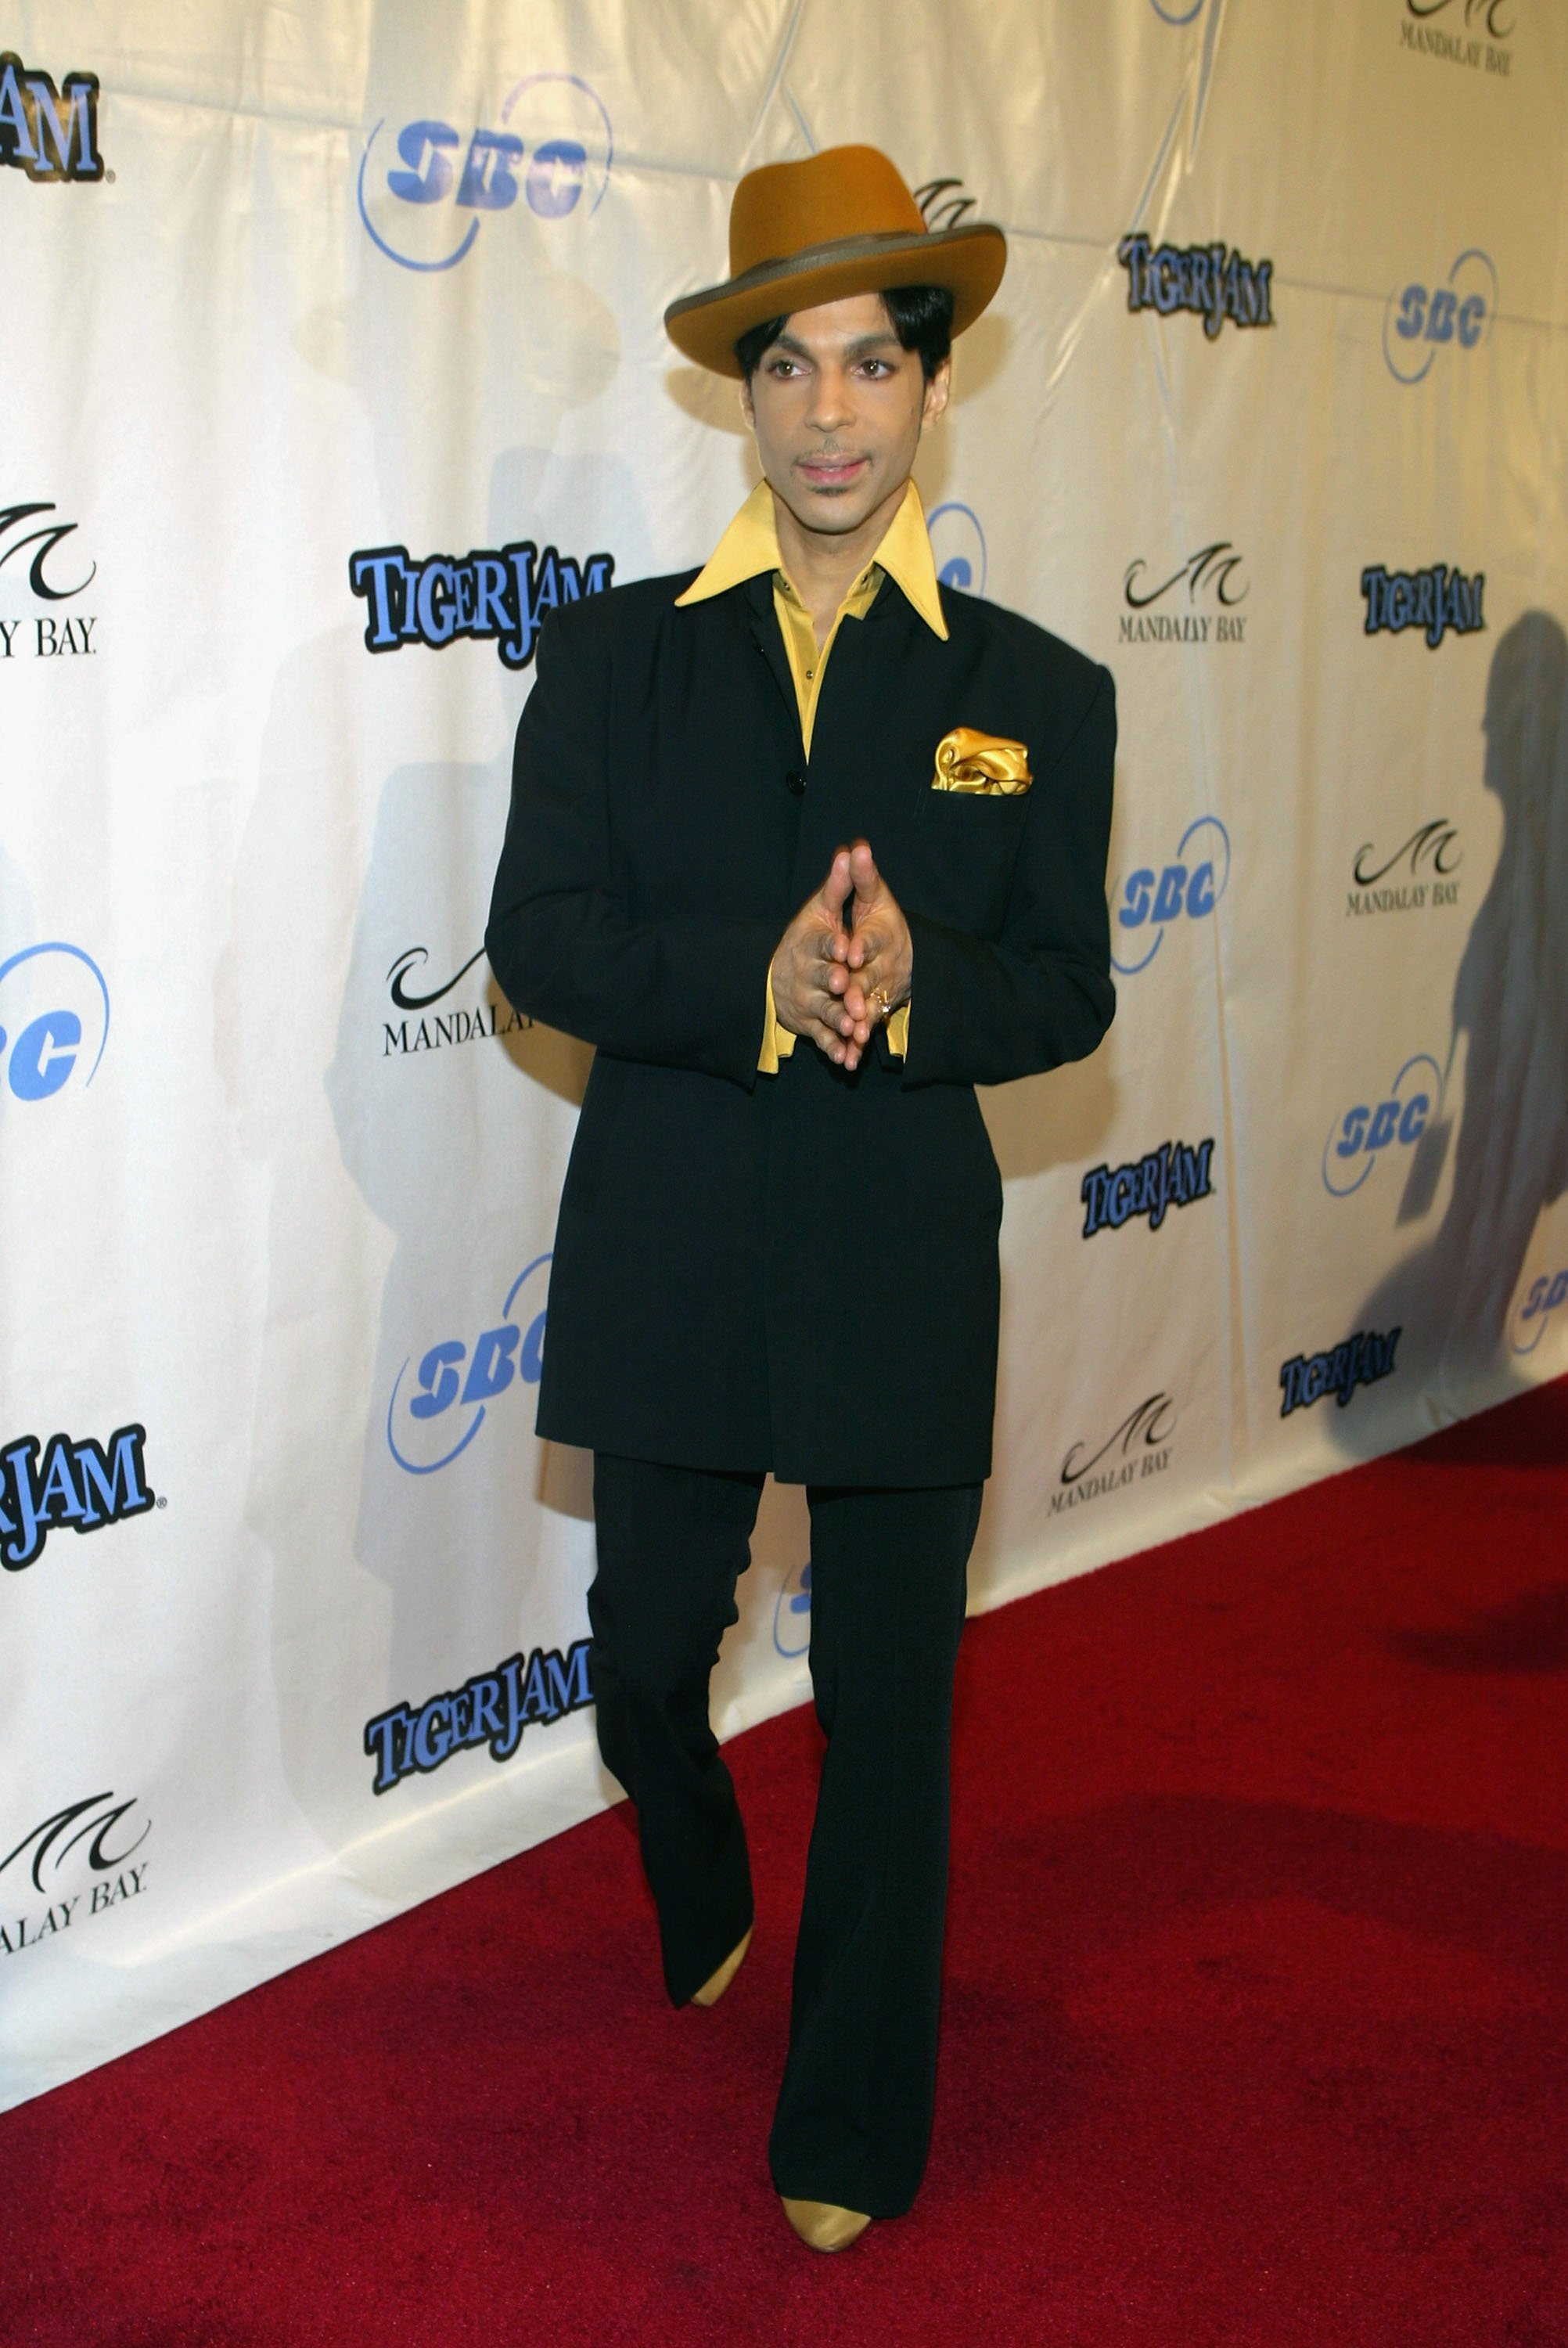 Prince attends the Tiger Woods Tiger Jam in Las Vegas, Nevada on May 29, 2004 | Photo: Getty Images